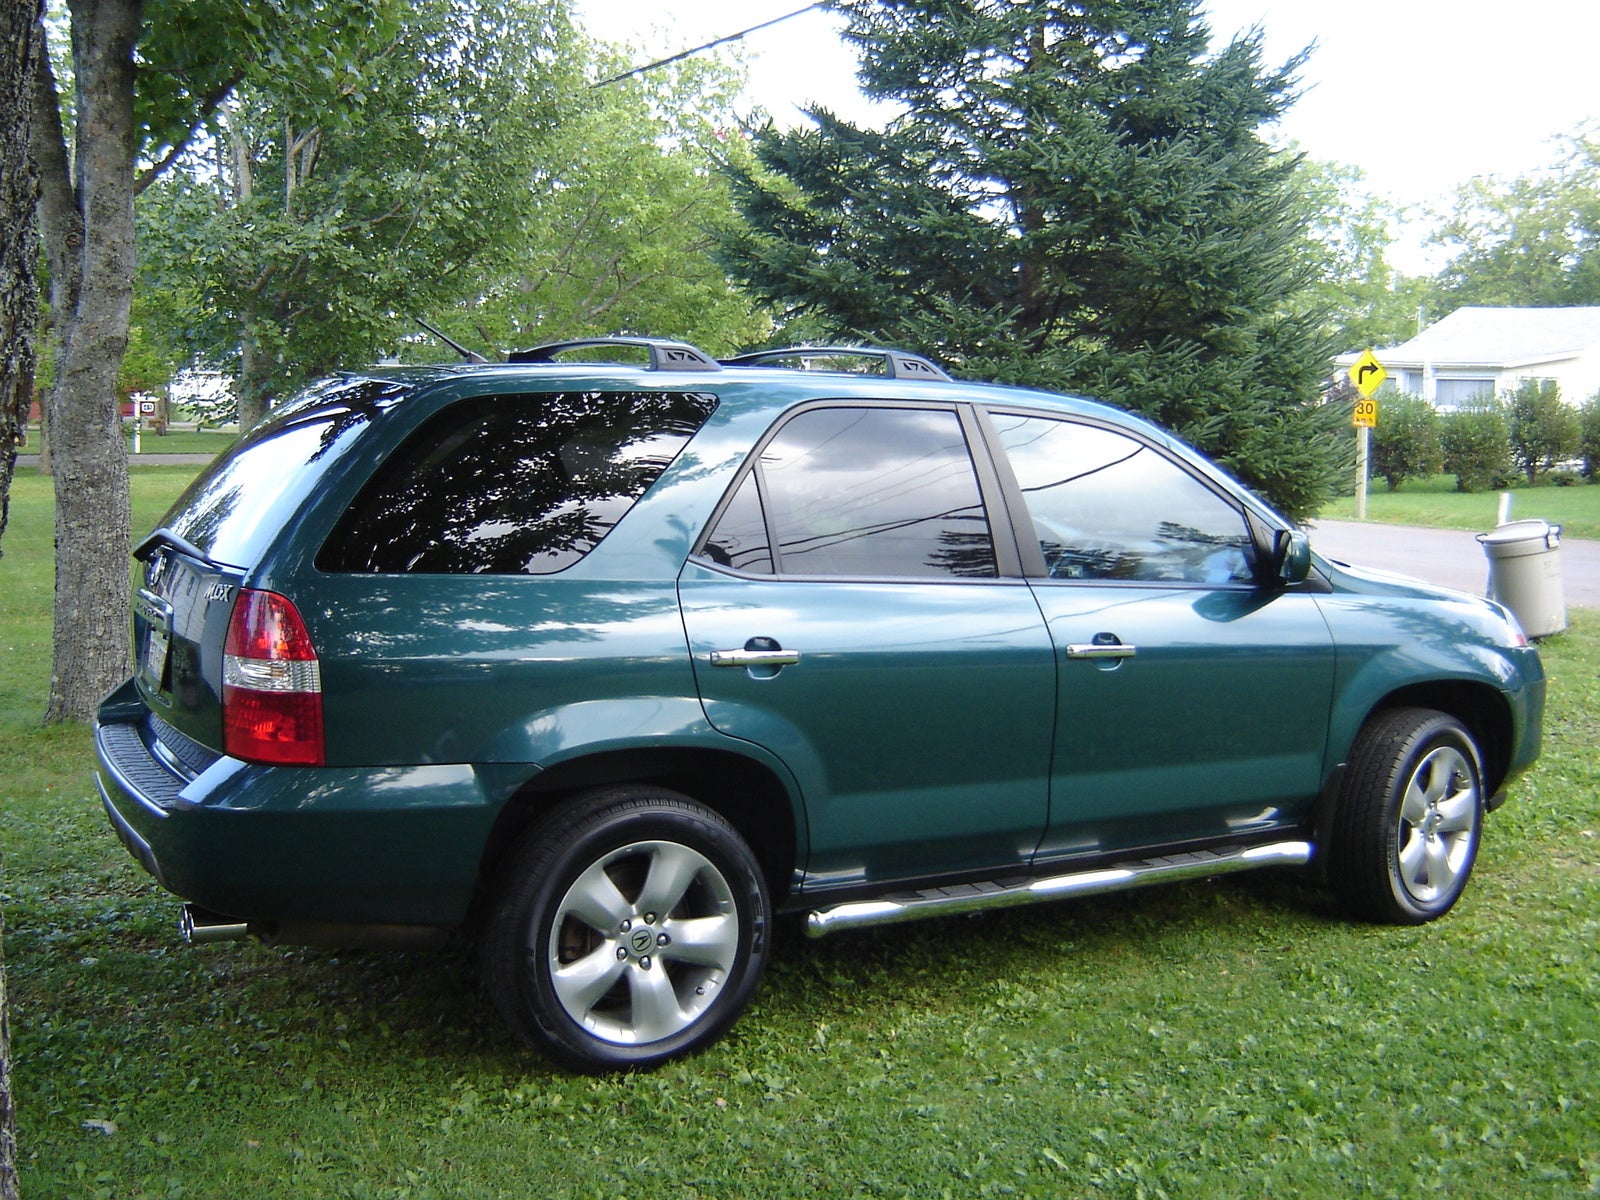 2002 Acura MDX Touring - Pictures - 2002 Acura MDX Touring picture ...